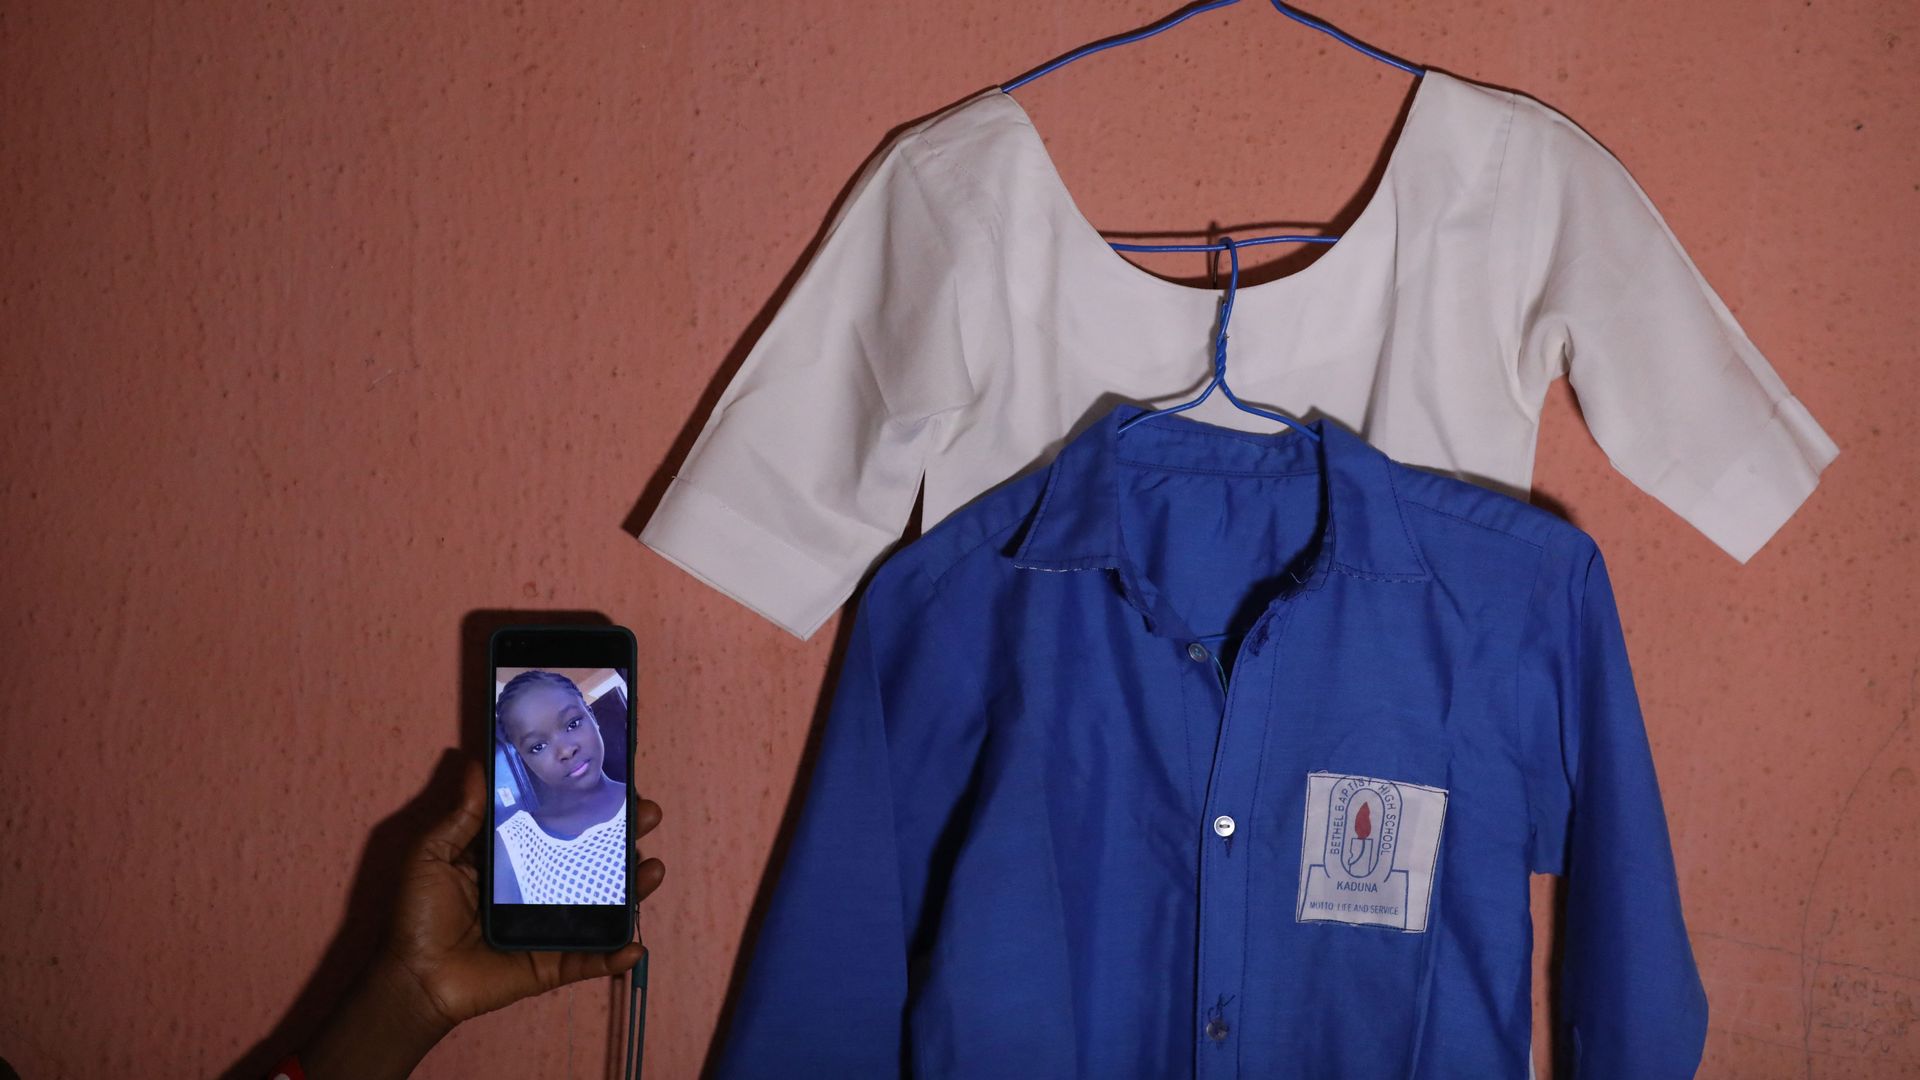 A hand holds a phone with a picture of a girl next to a hanging school uniform